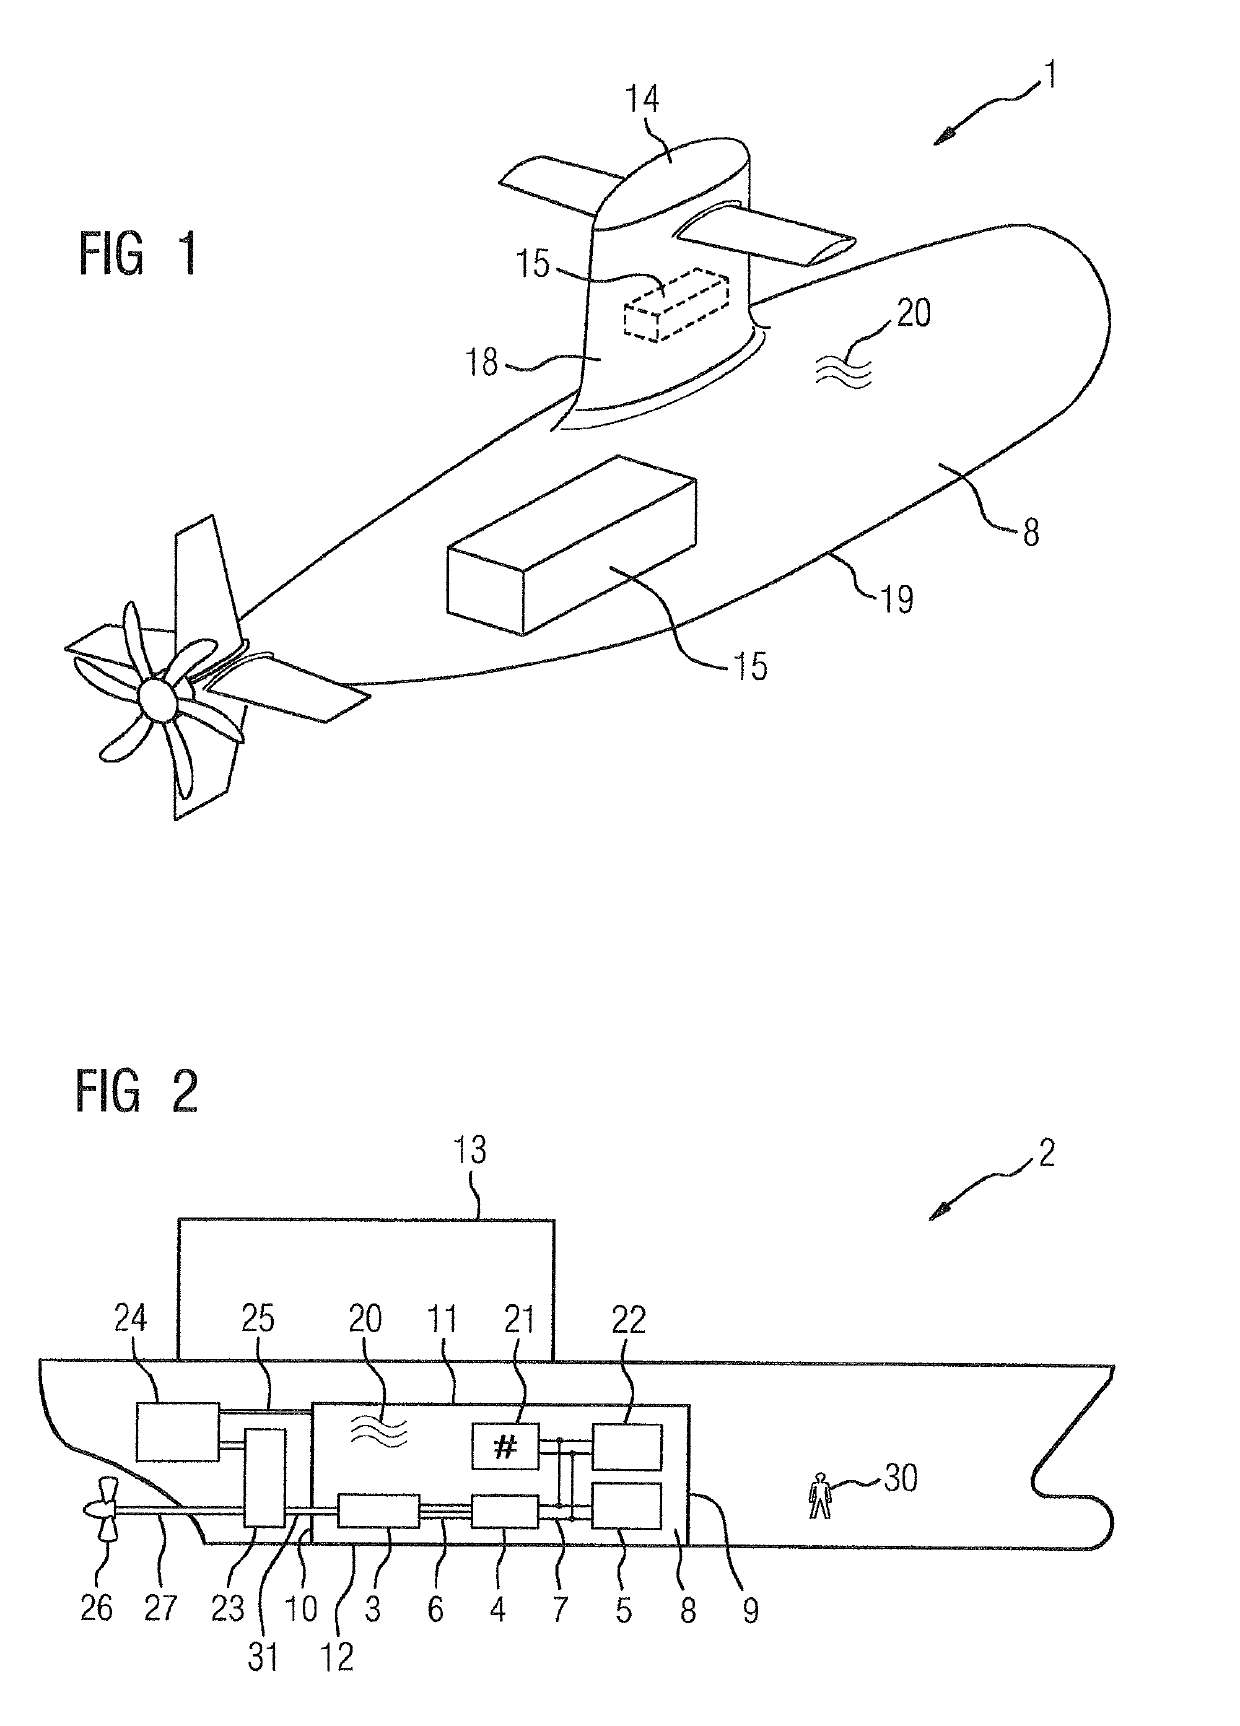 Watercraft and Method for Operating the Watercraft